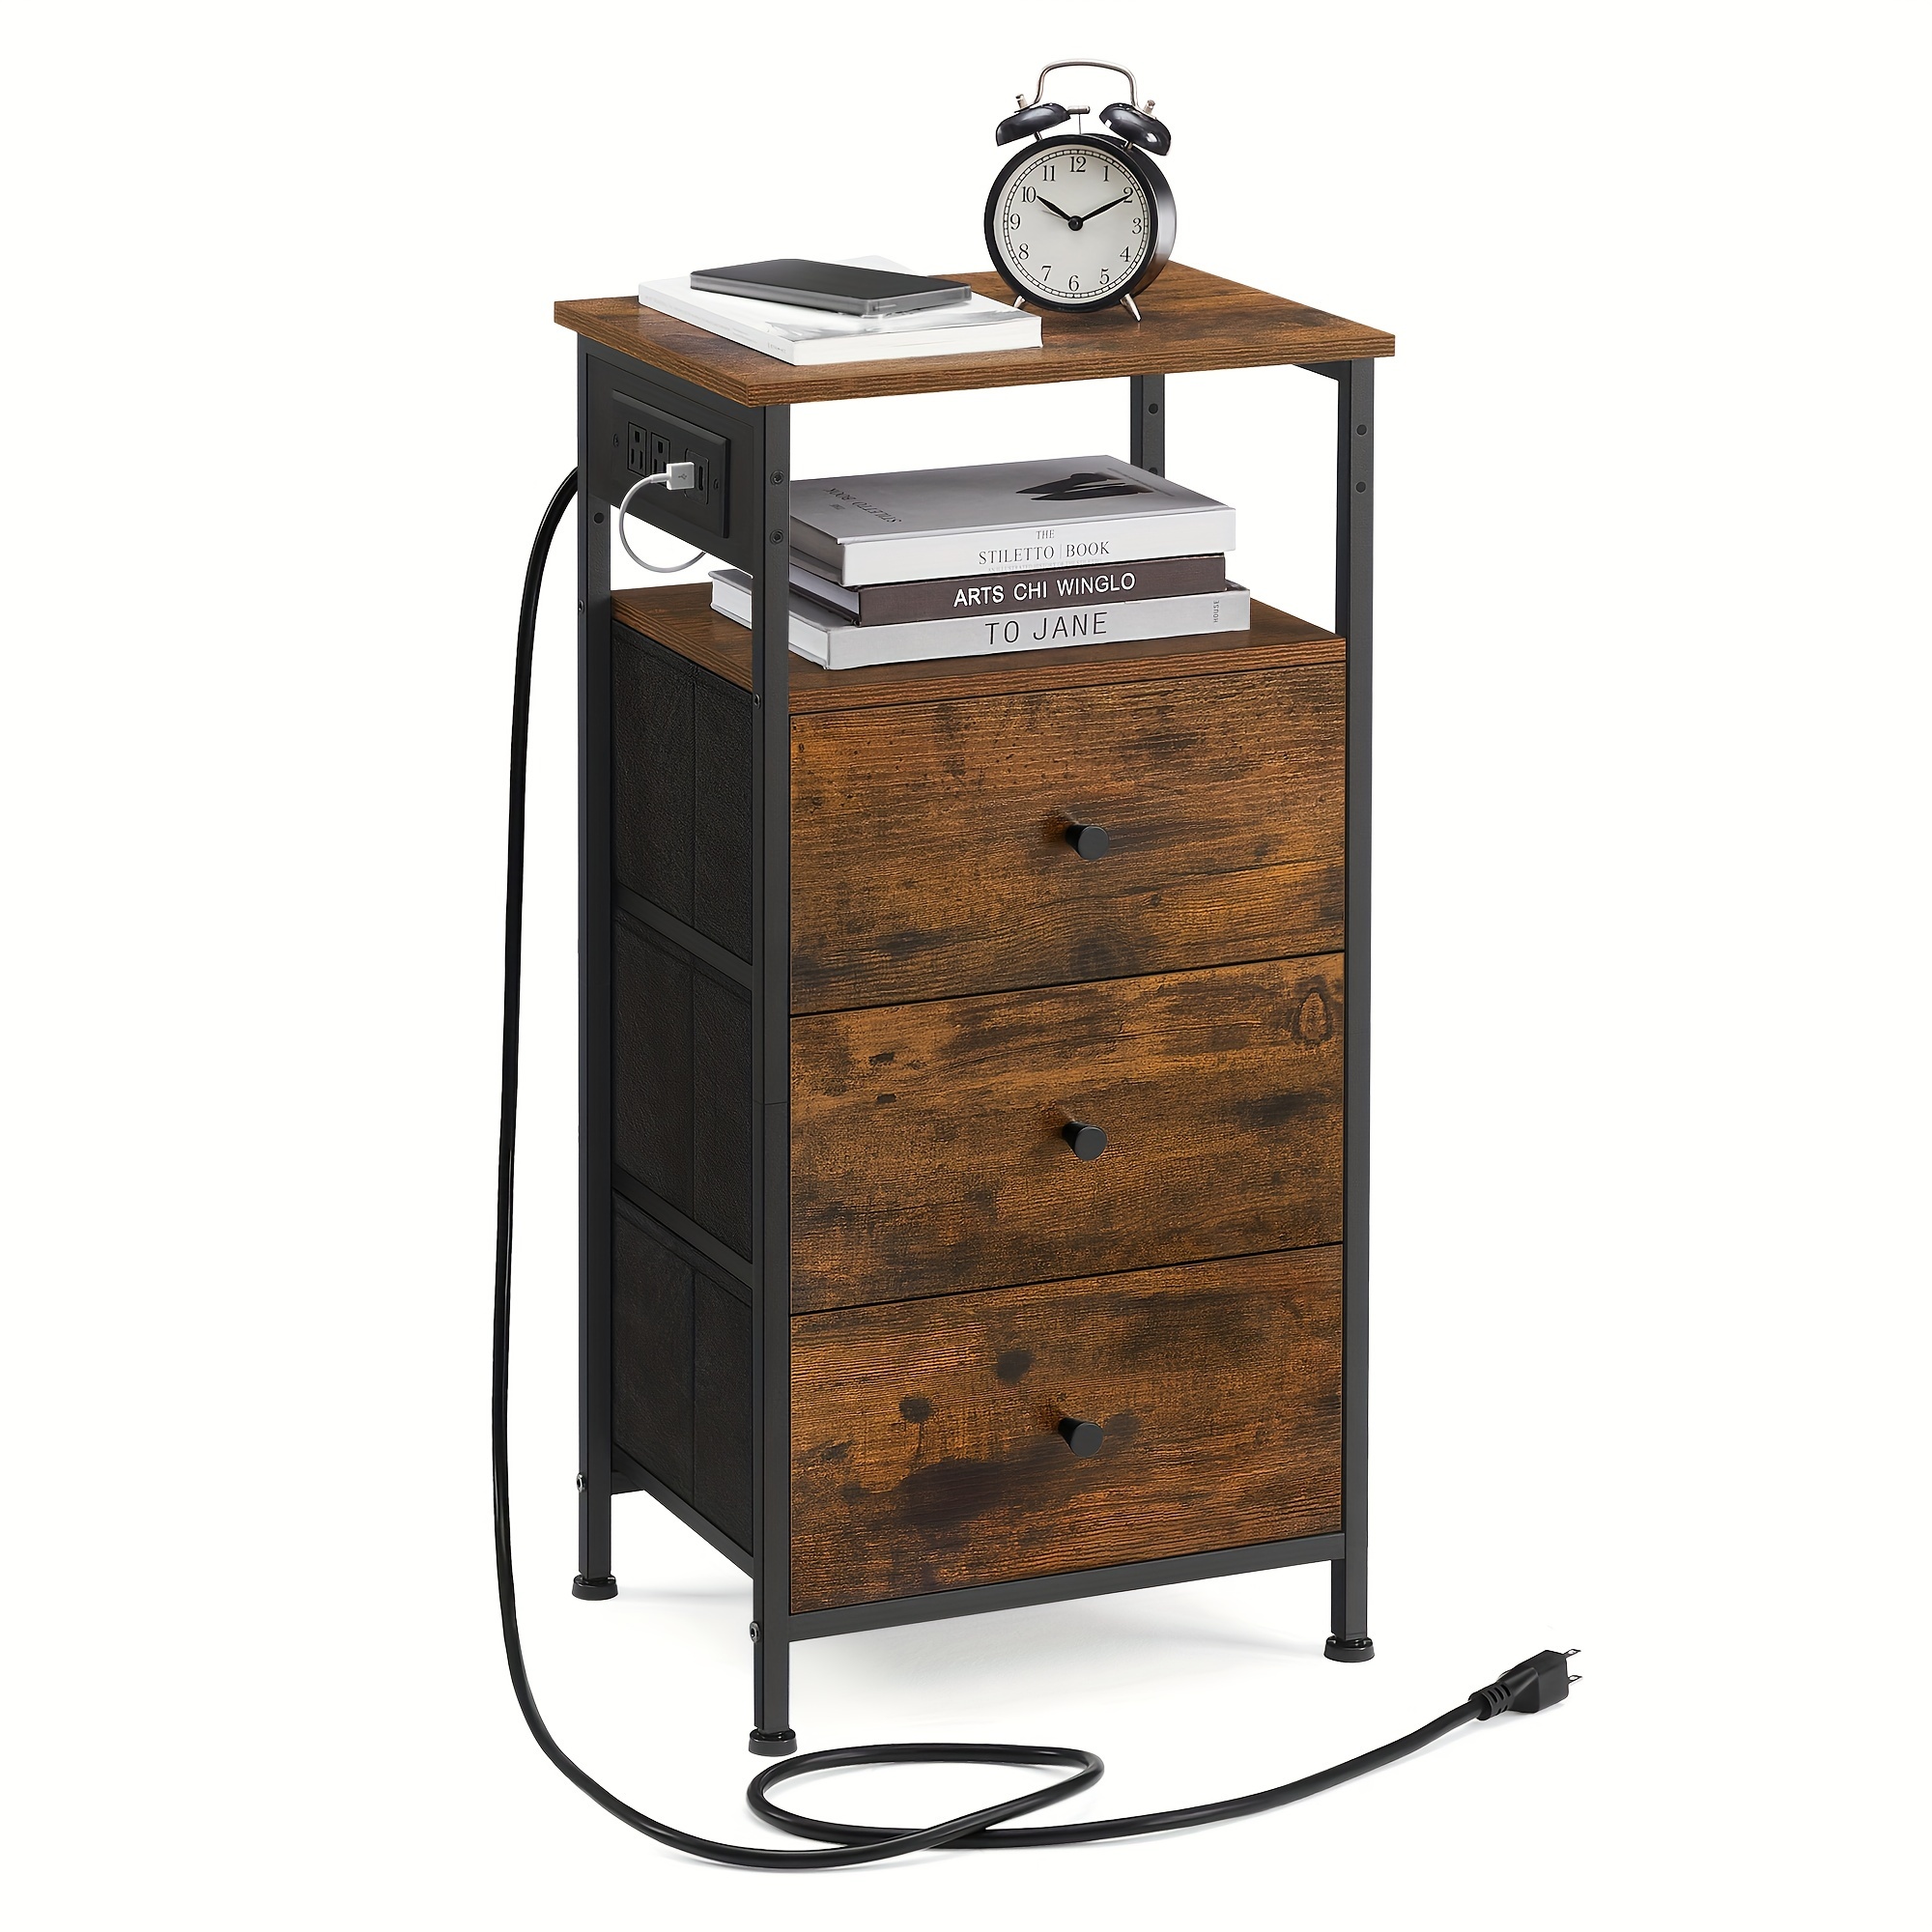 

Vasagle Nightstand With Charging Station, Night Stand, Side Table With 3 Drawers And 1 Open Shelf, Fabric Drawers With Mdf Front, End Table, Rustic Brown And Classic Black